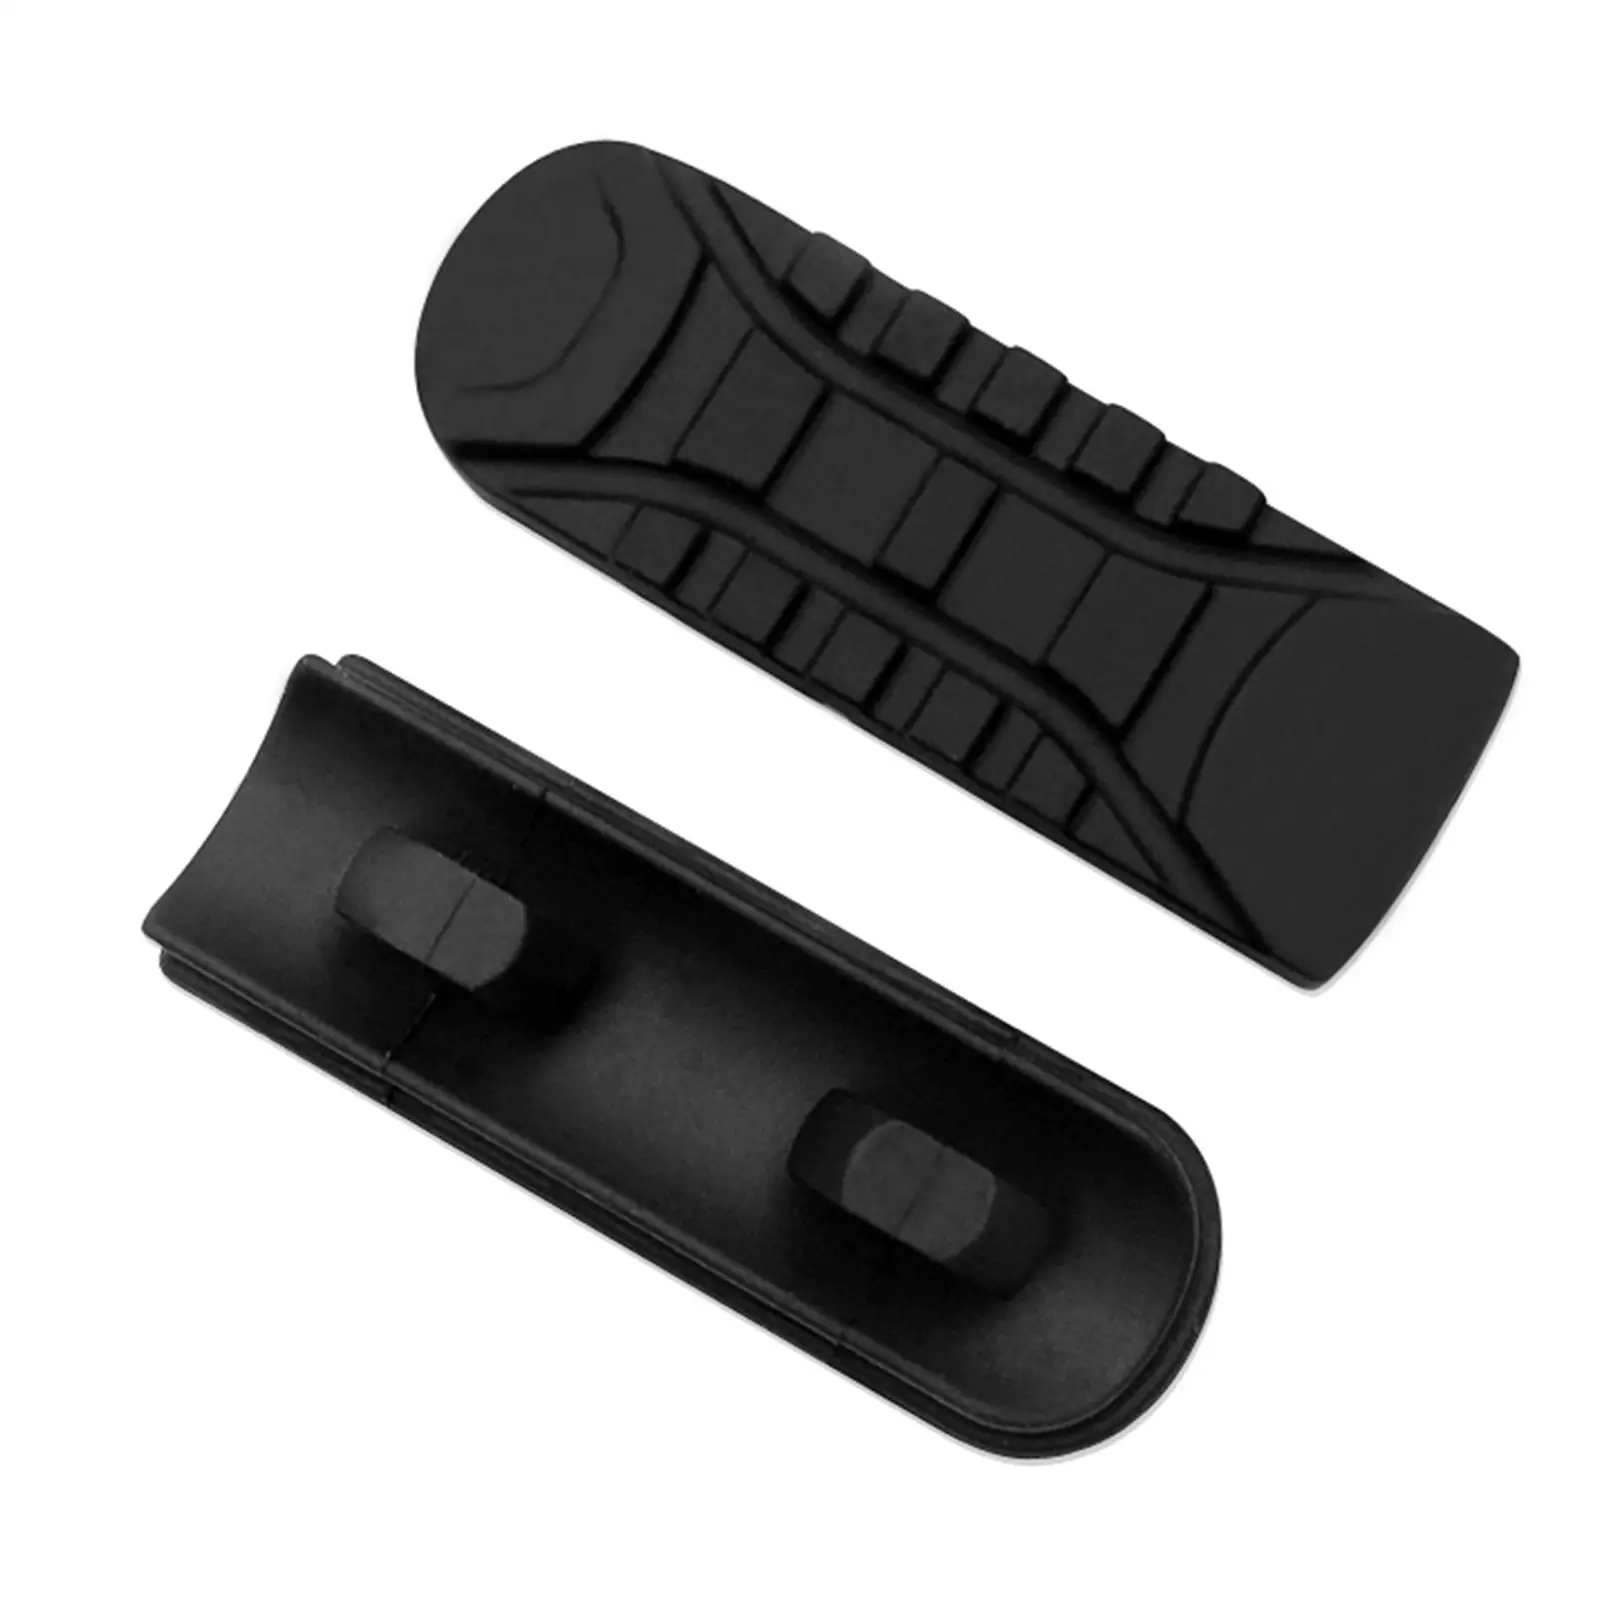 2Pcs Motorcycle Front Footrest Left and Right Rubber Foot Pedals for BMW R1200GS LC Adv F850GS F750GS Accessories Durable